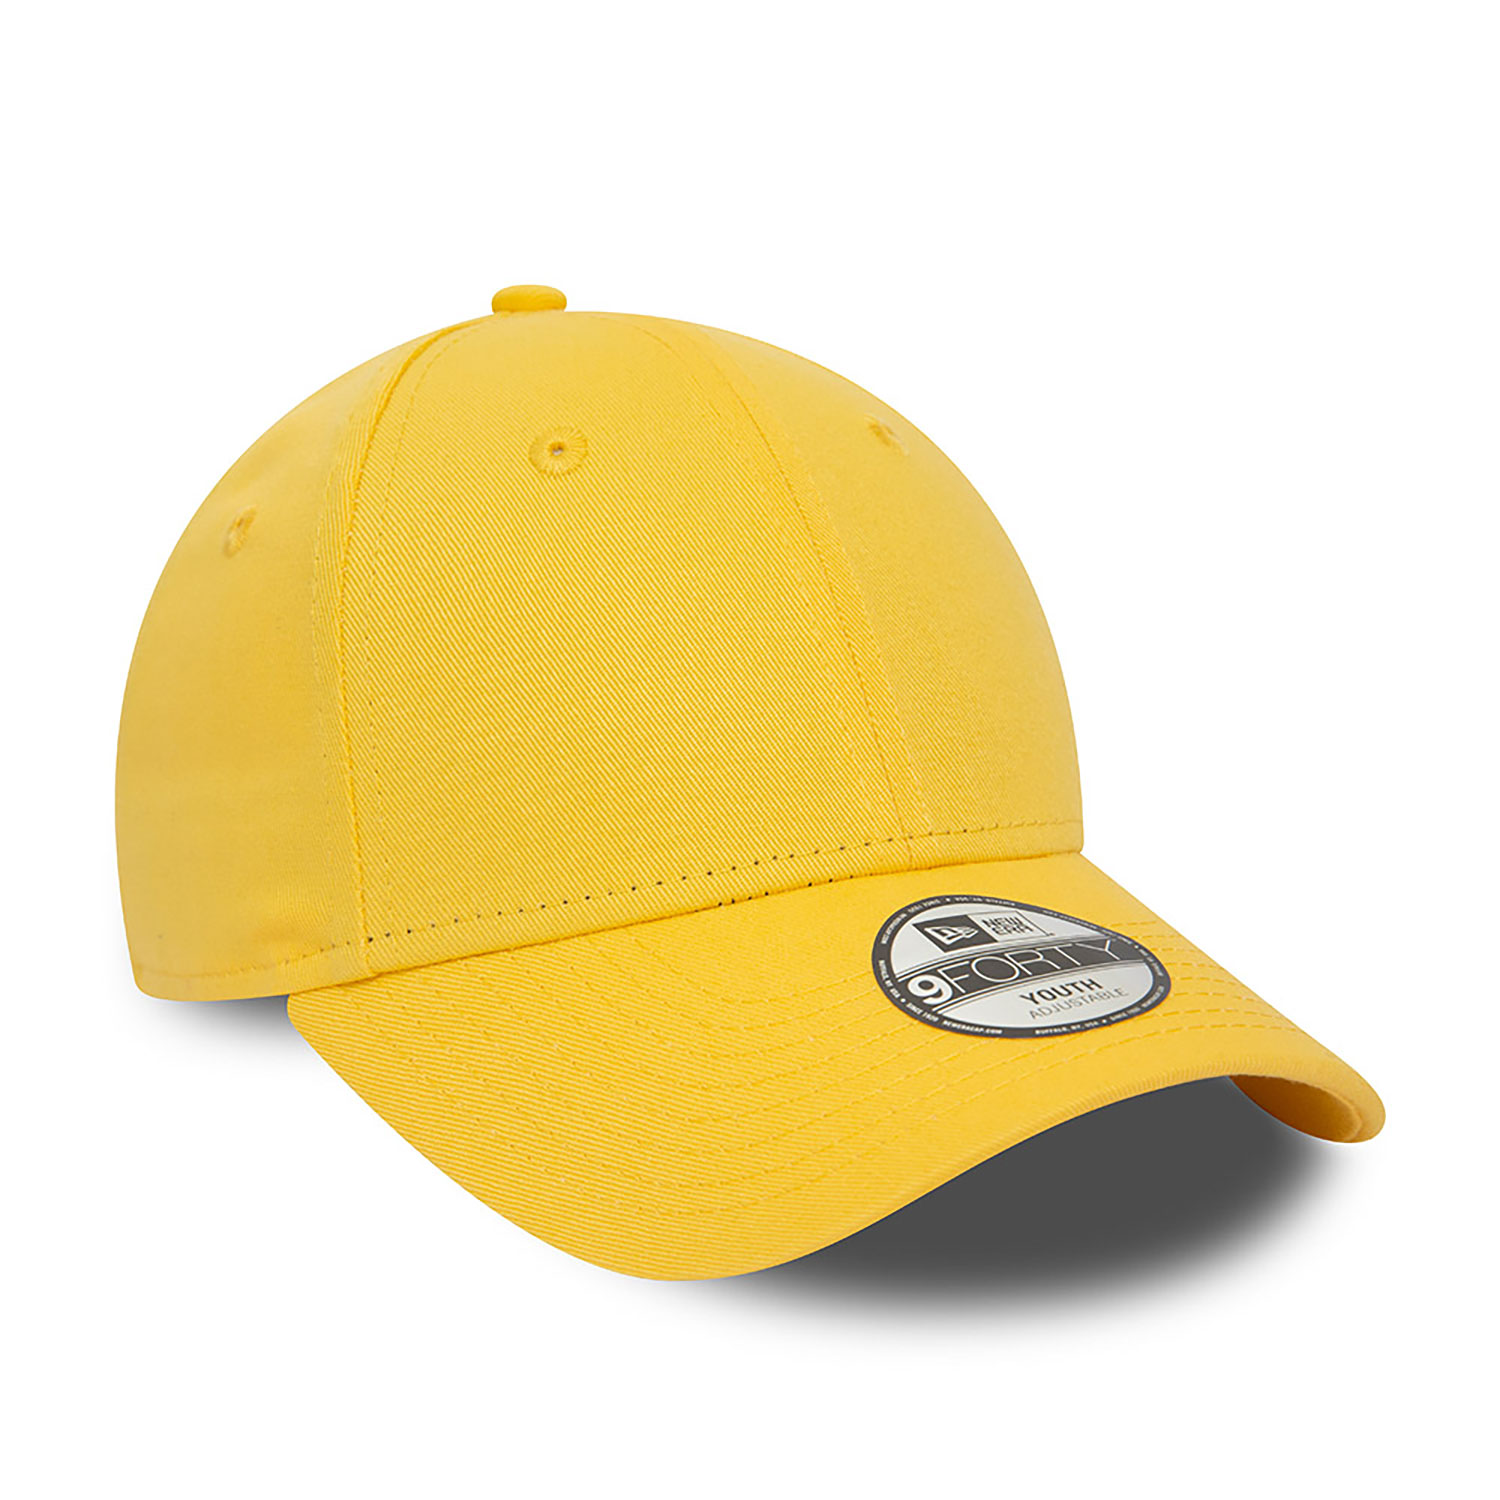 New Era Youth Essential Yellow 9FORTY Adjustable Cap